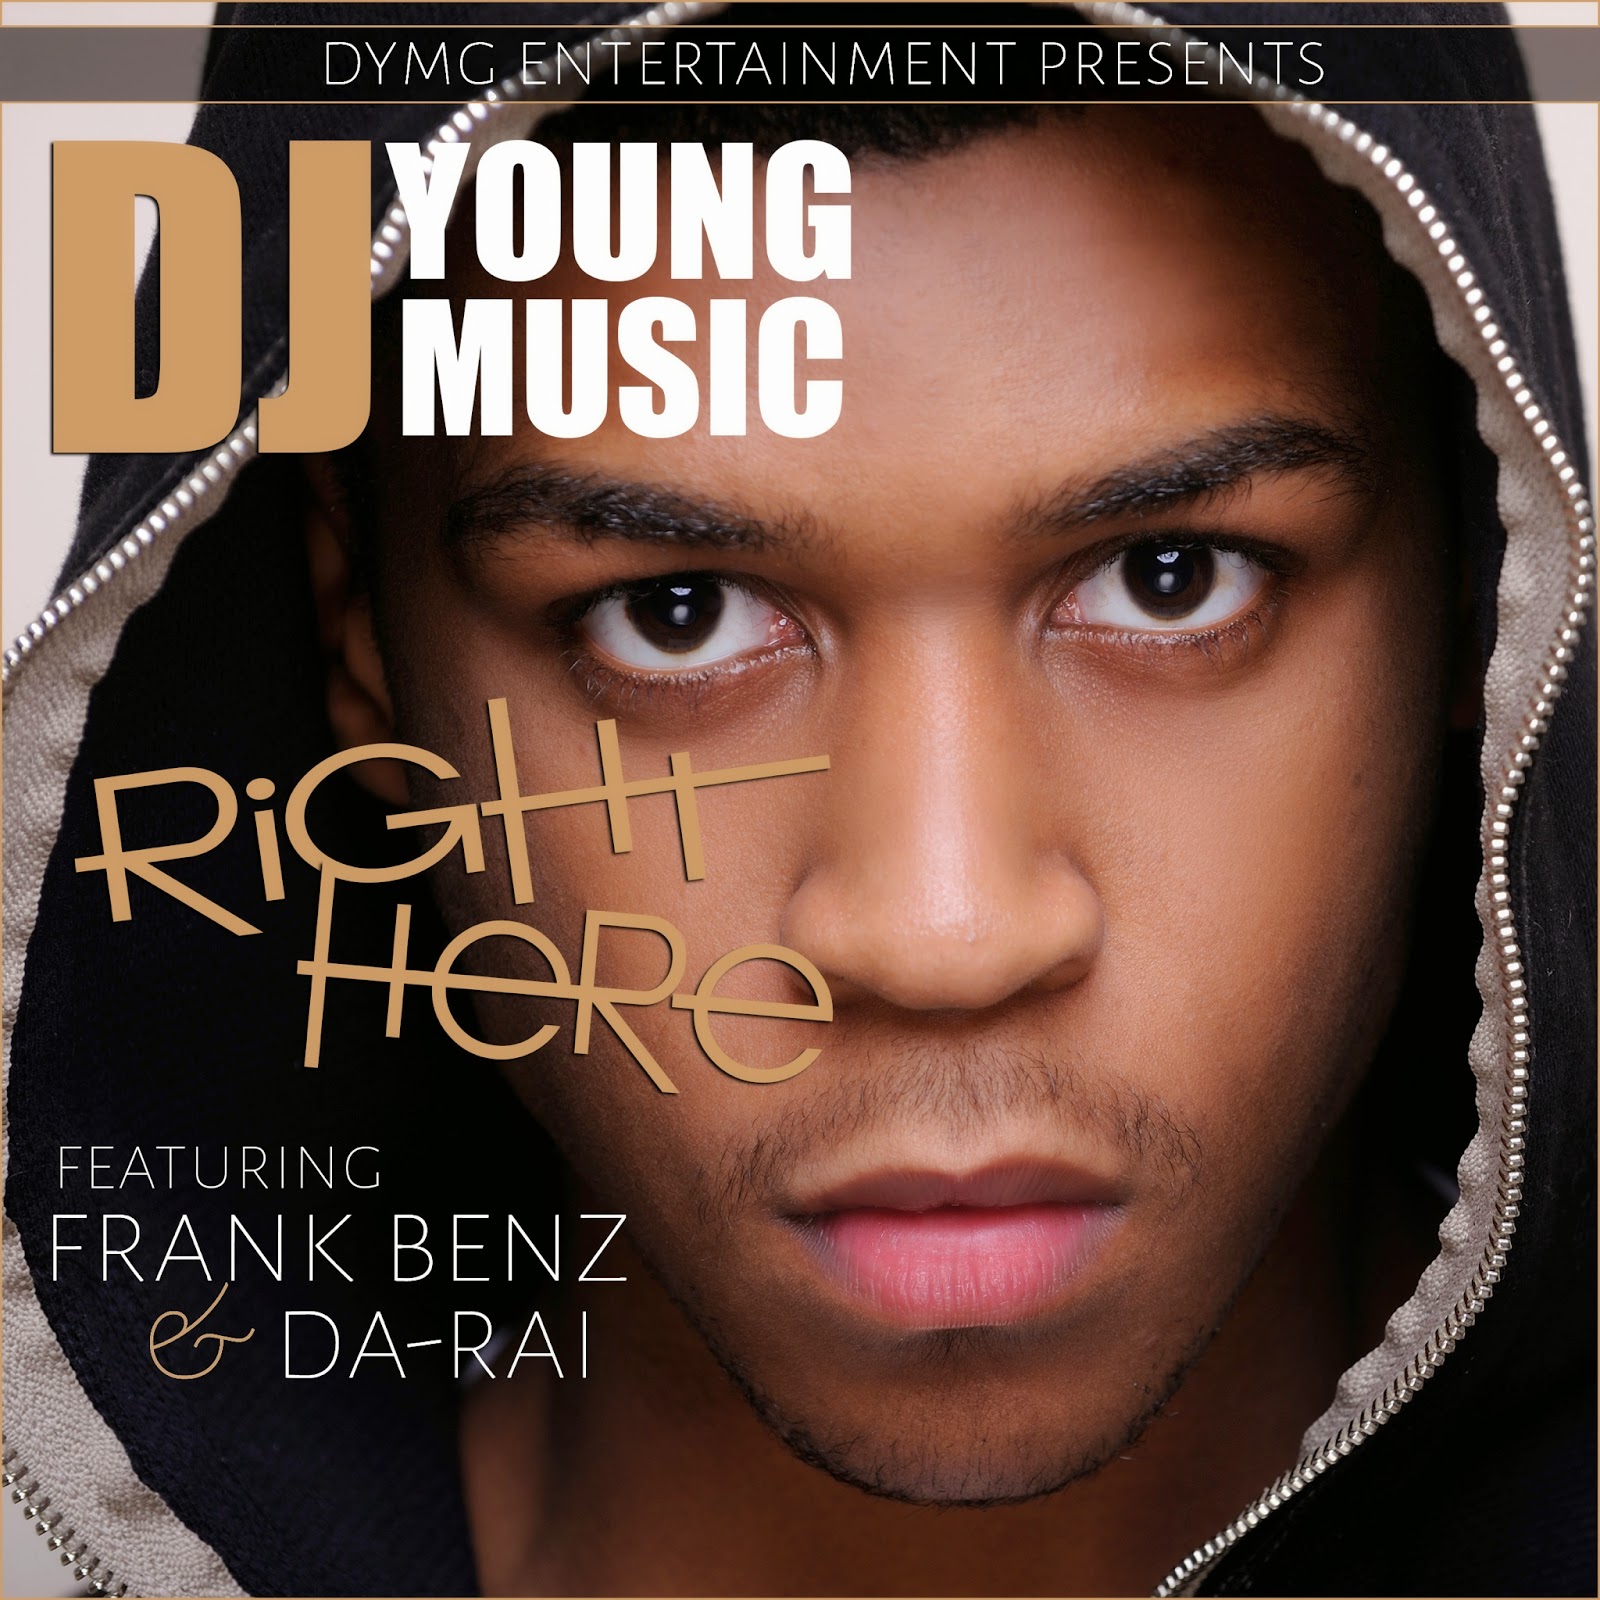 Feature music. DJ young. Young musician. Featuring Music album.